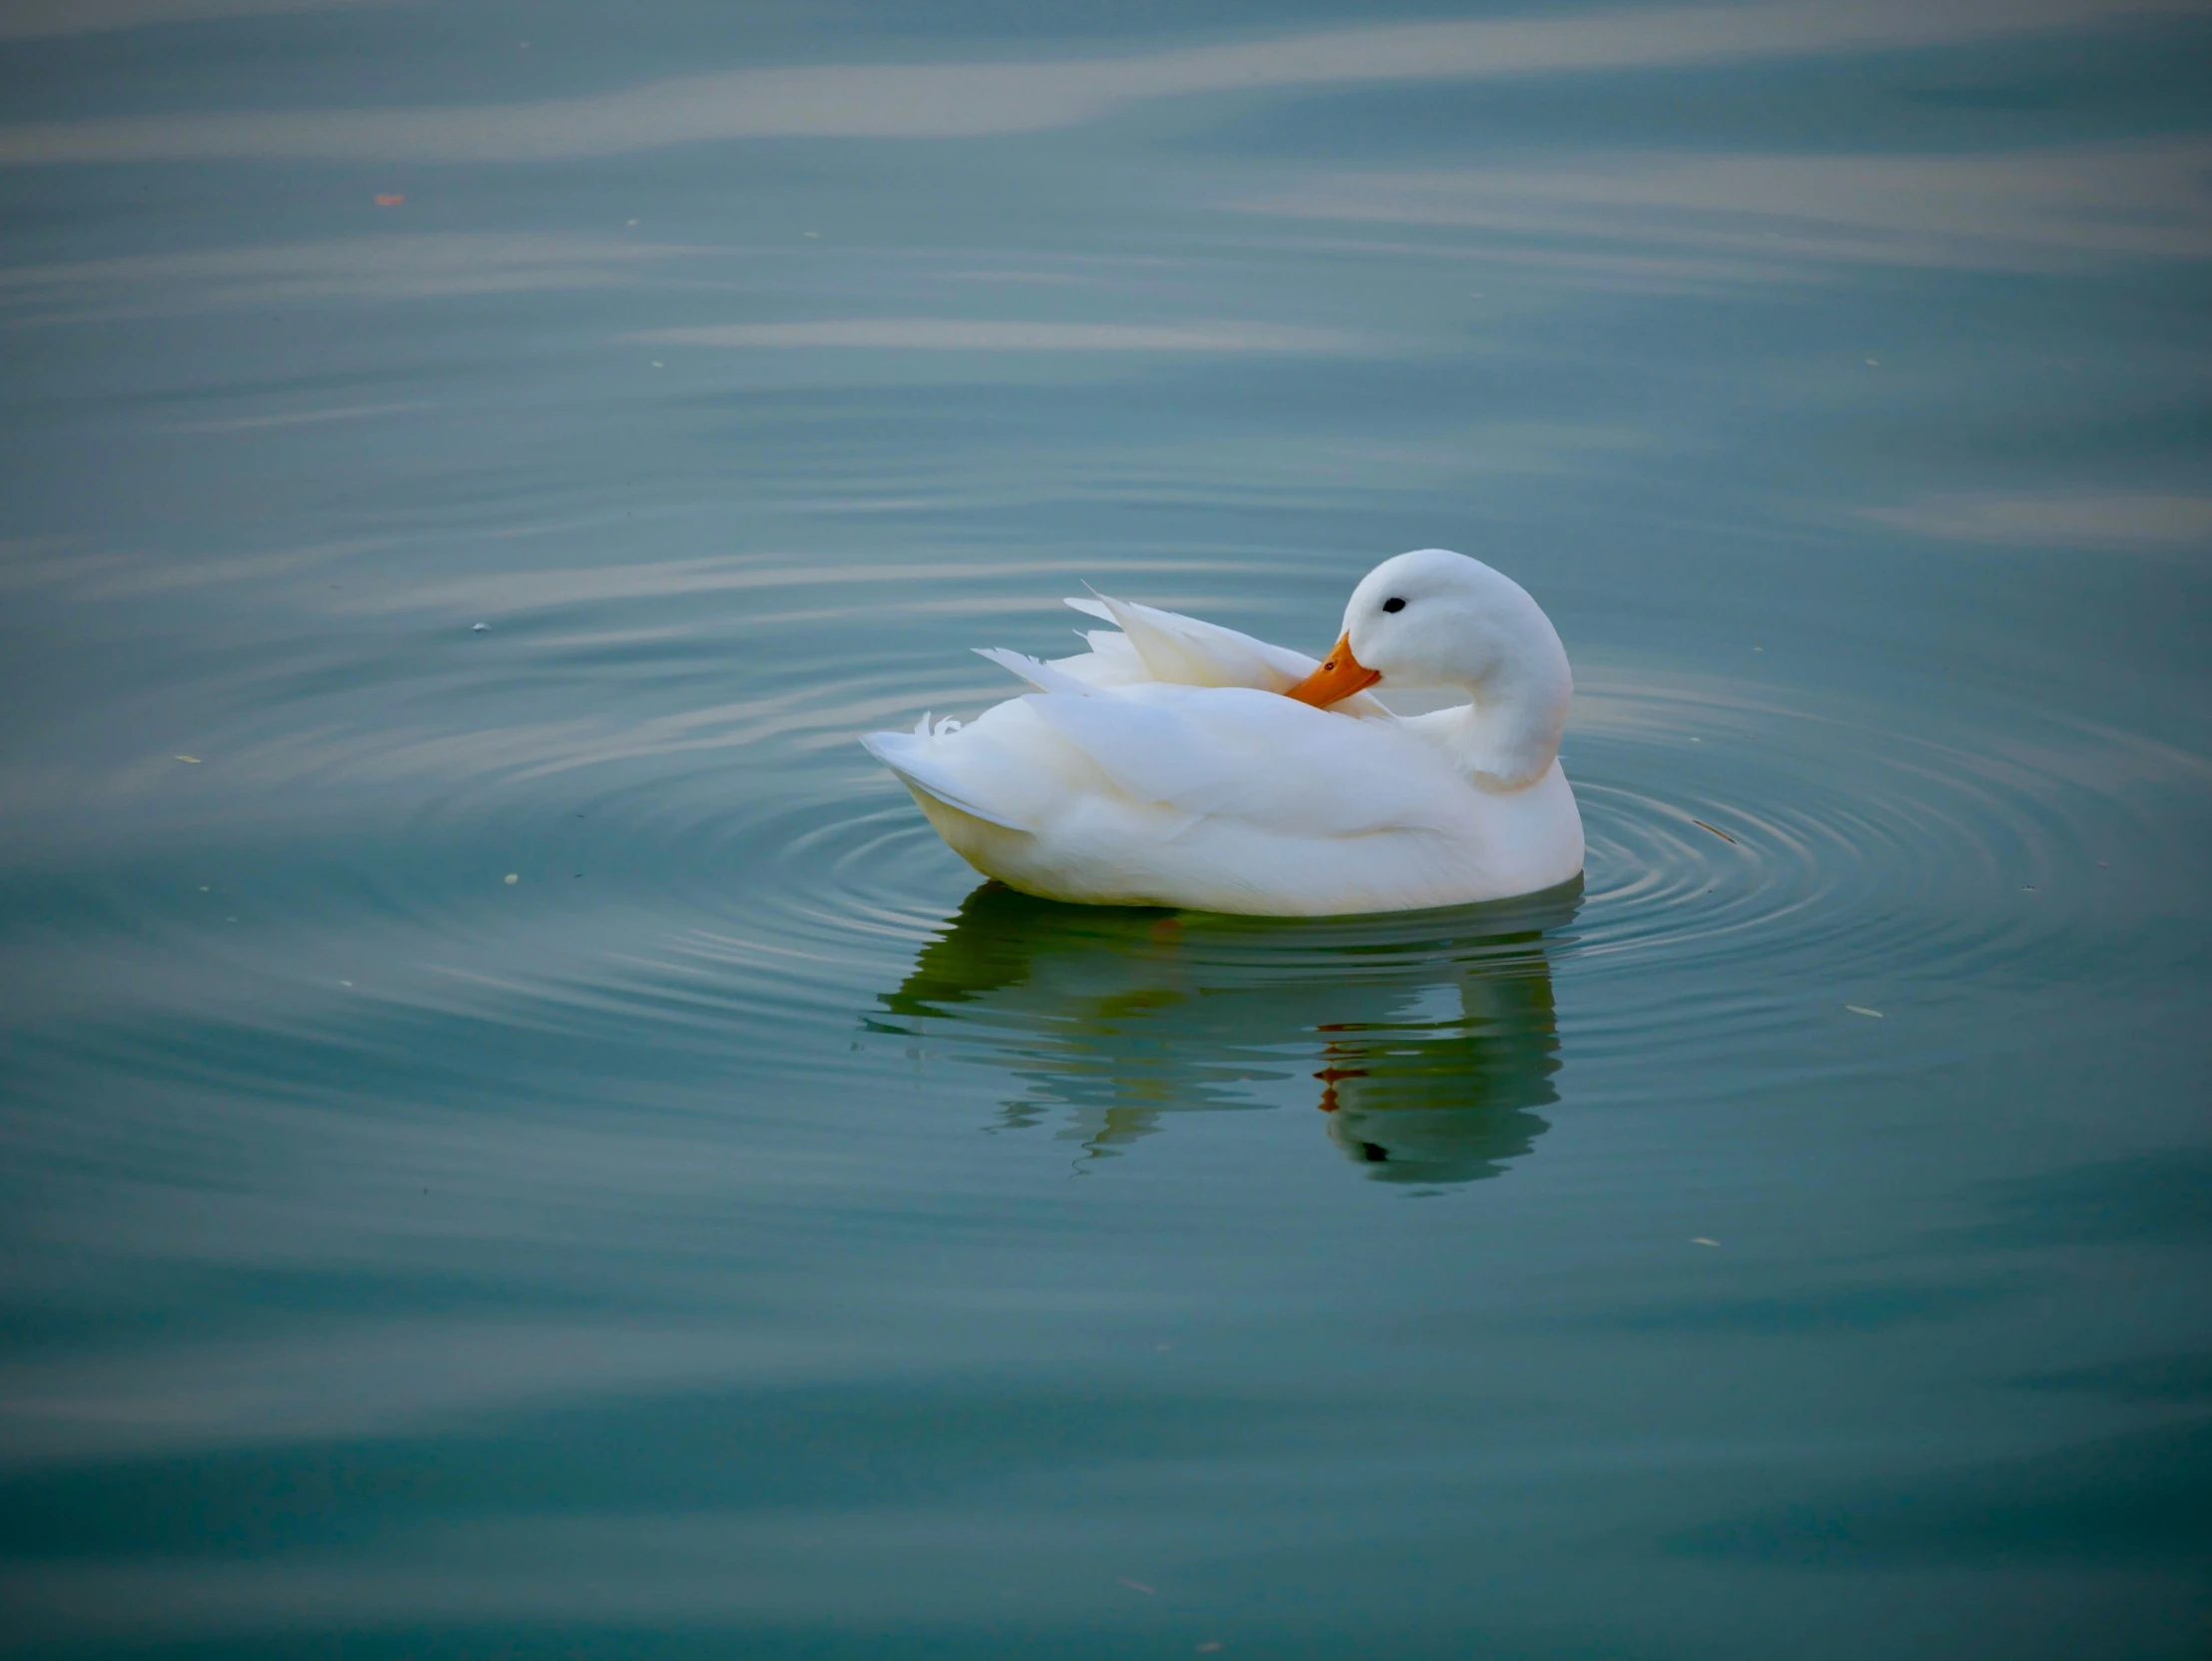 a duck swimming in a lake near another body of water